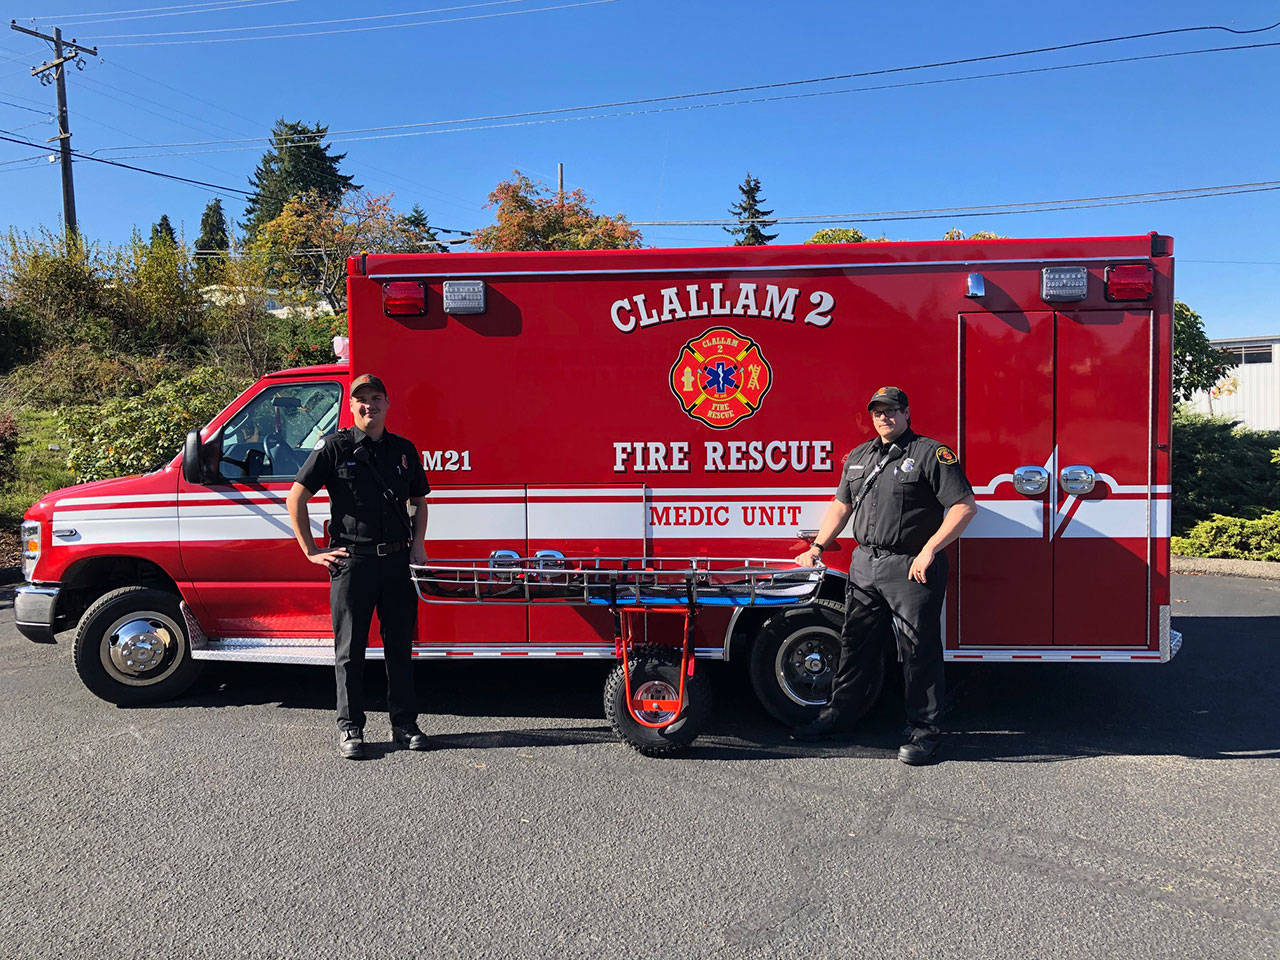 Firefighter/EMT Zach Gear, left, and firefighter/paramedic Ian Brueckner display the new litter with wheel attachment recently purchased by Clallam 2 Fire Rescue with funding received by the Clallam County Physicians Community Benefit Fund grant. (Clallam County Fire District 2)